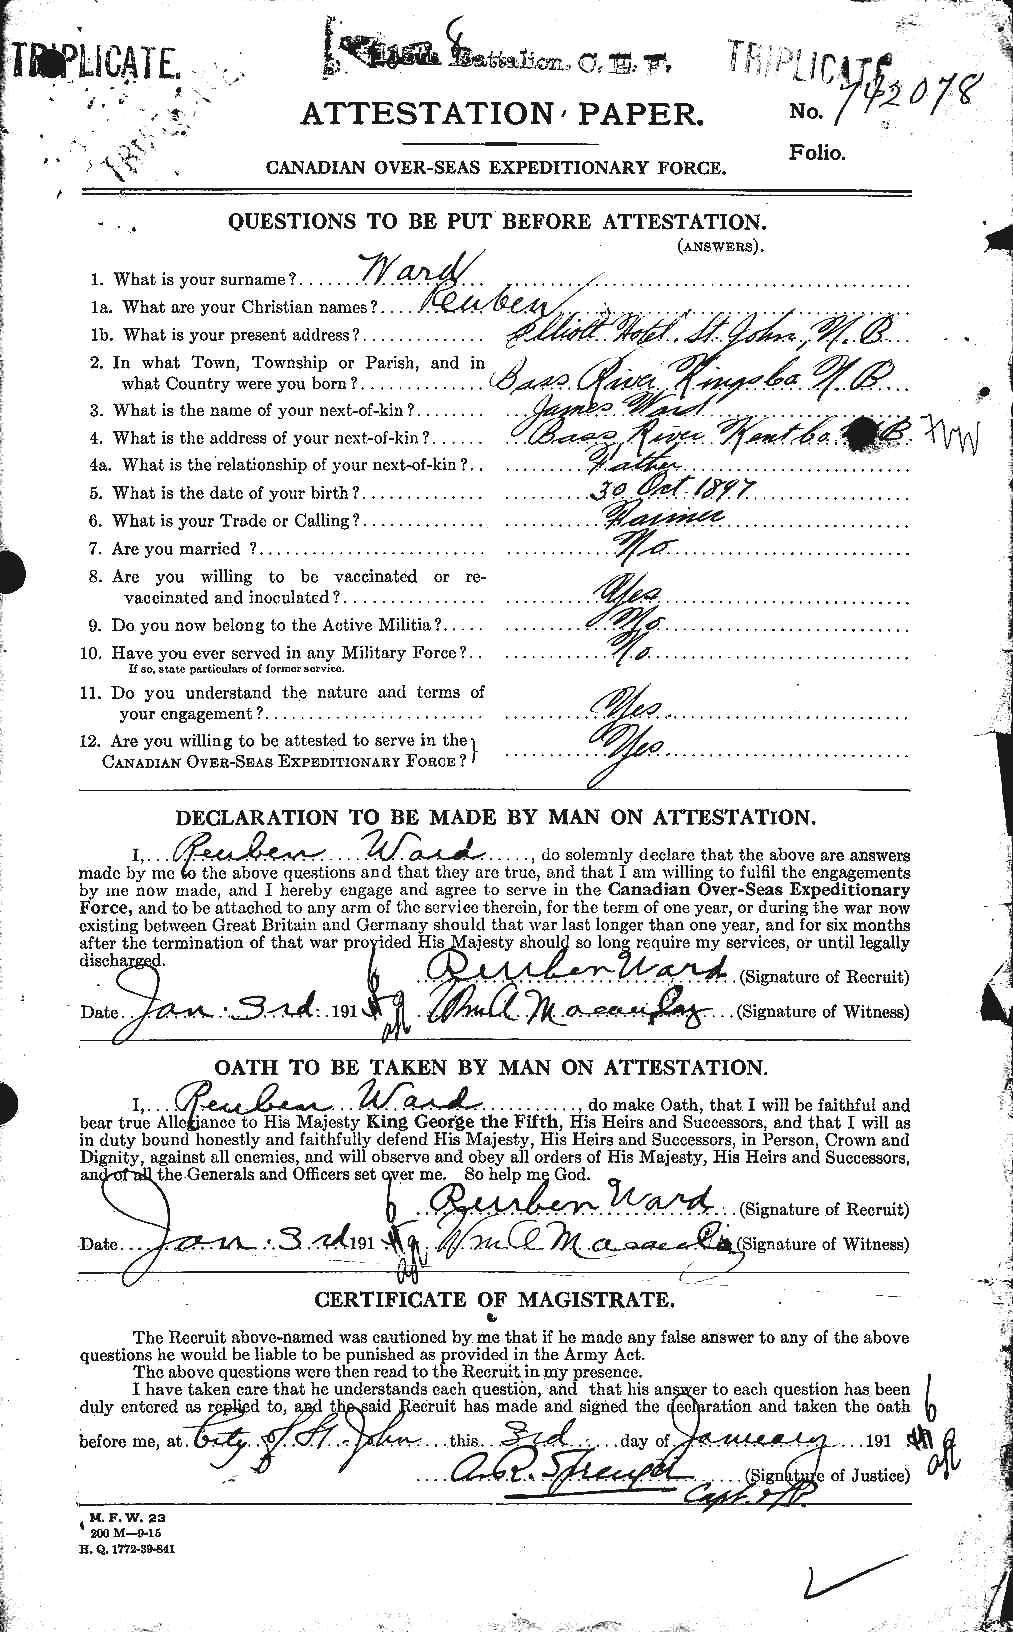 Personnel Records of the First World War - CEF 659646a